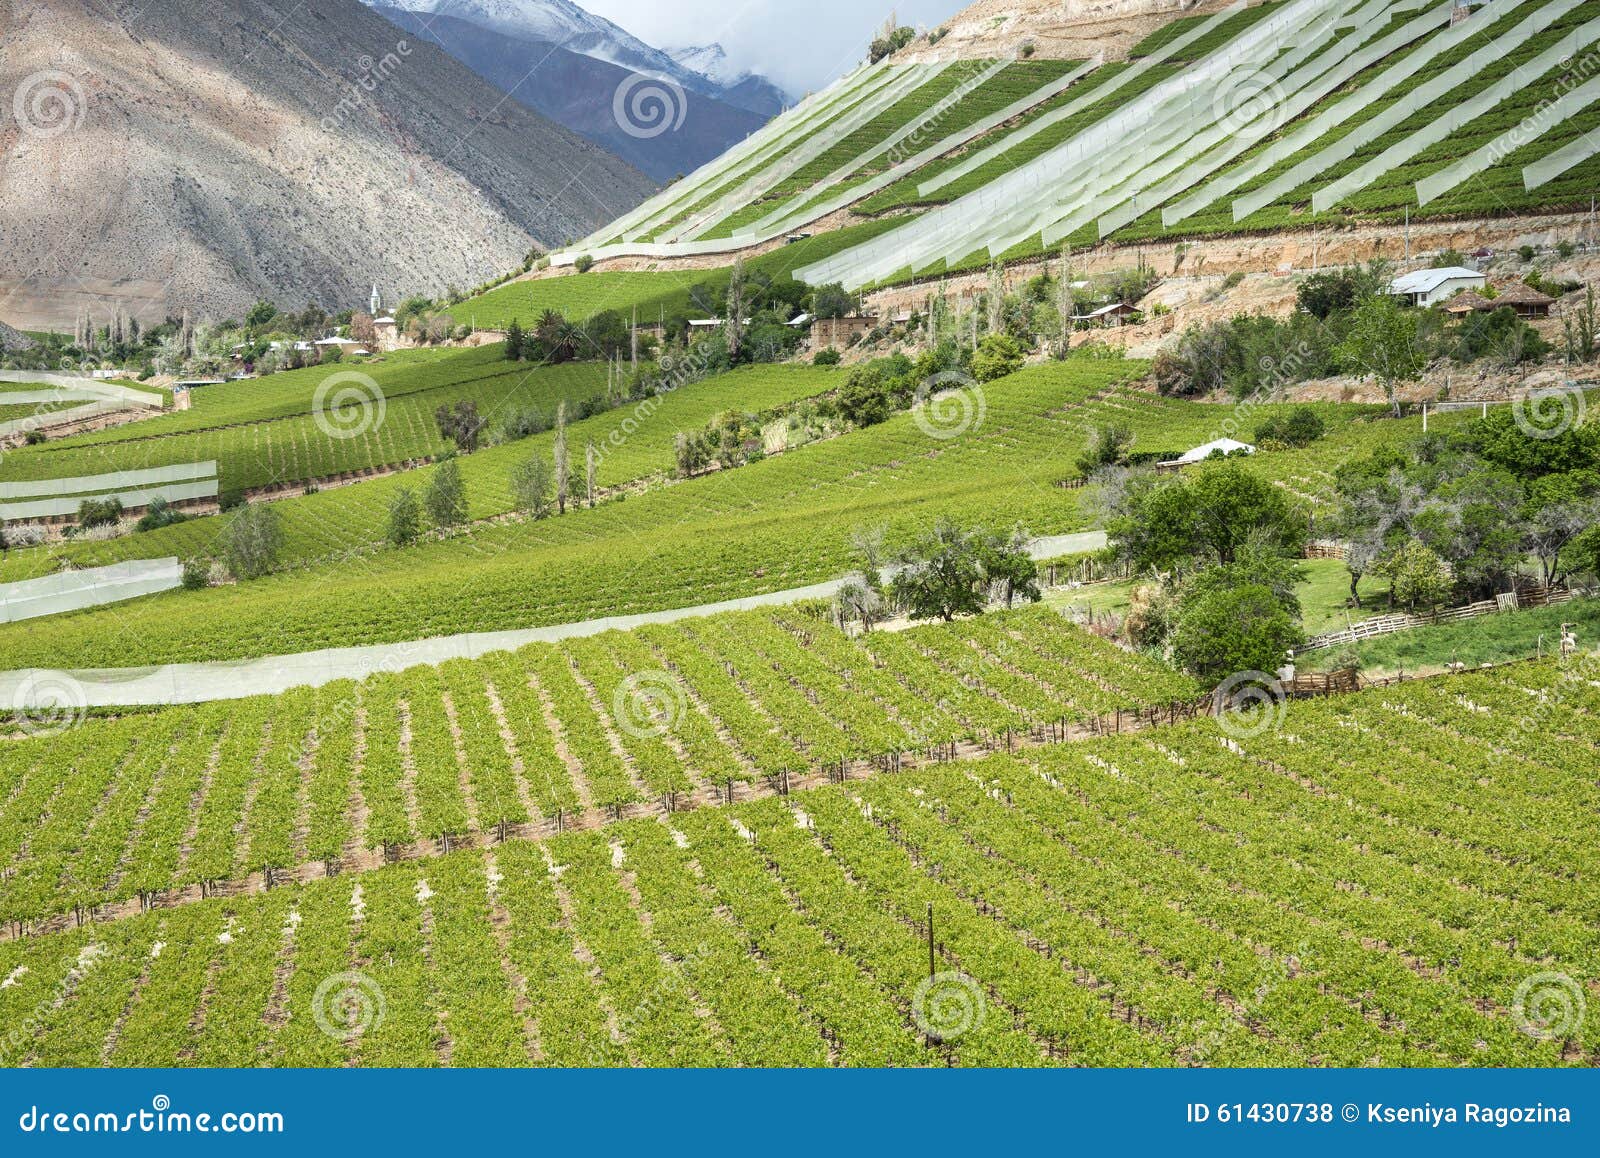 vineyards of the elqui valley, andes part of atacama